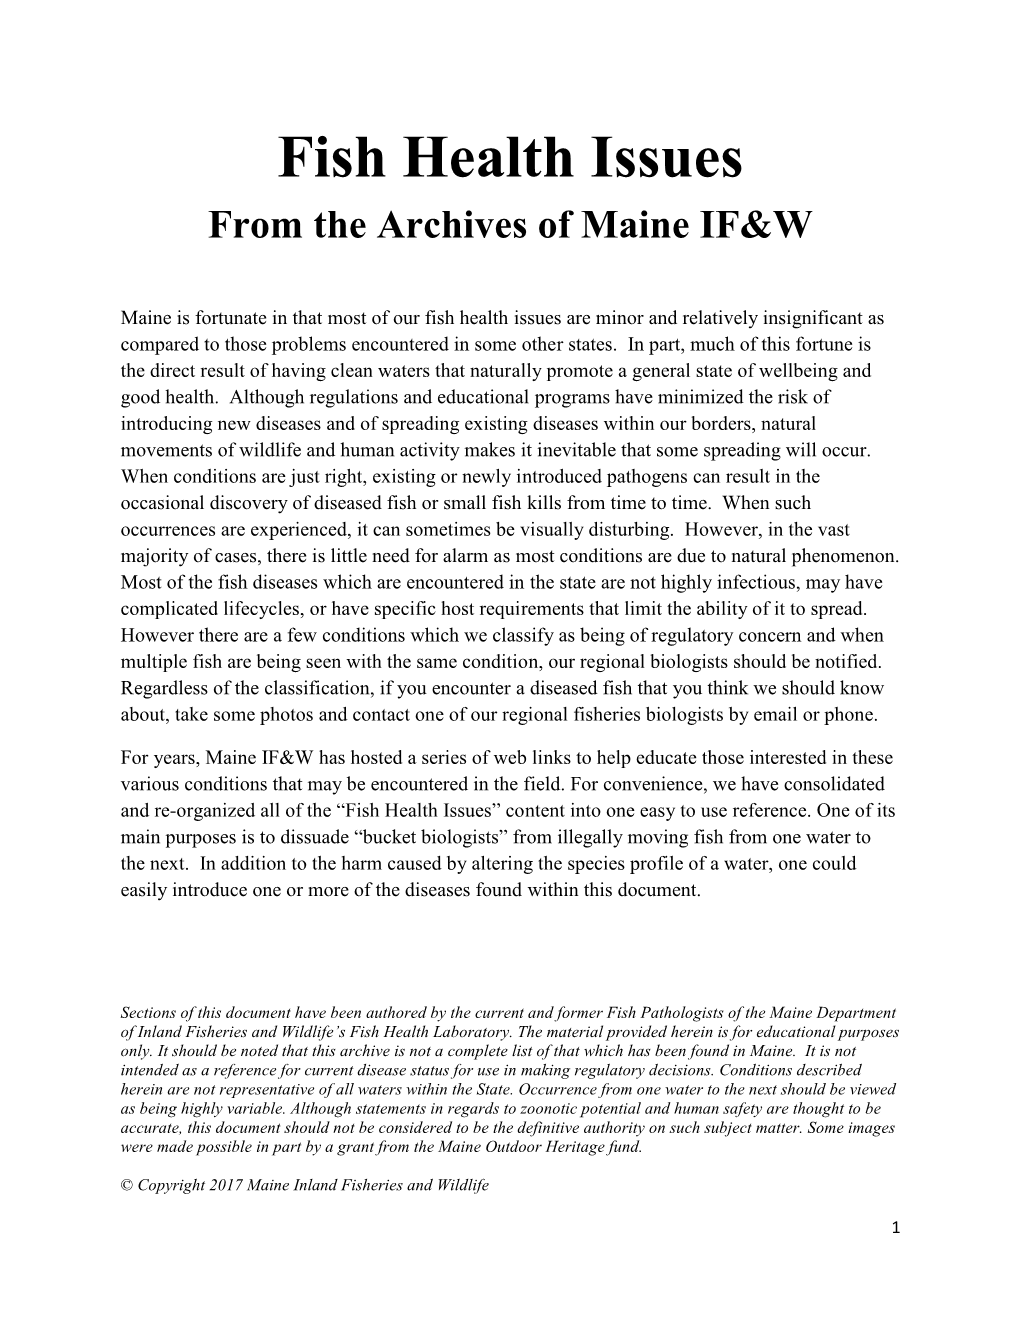 Fish Health Issues from the Archives of Maine IF&W